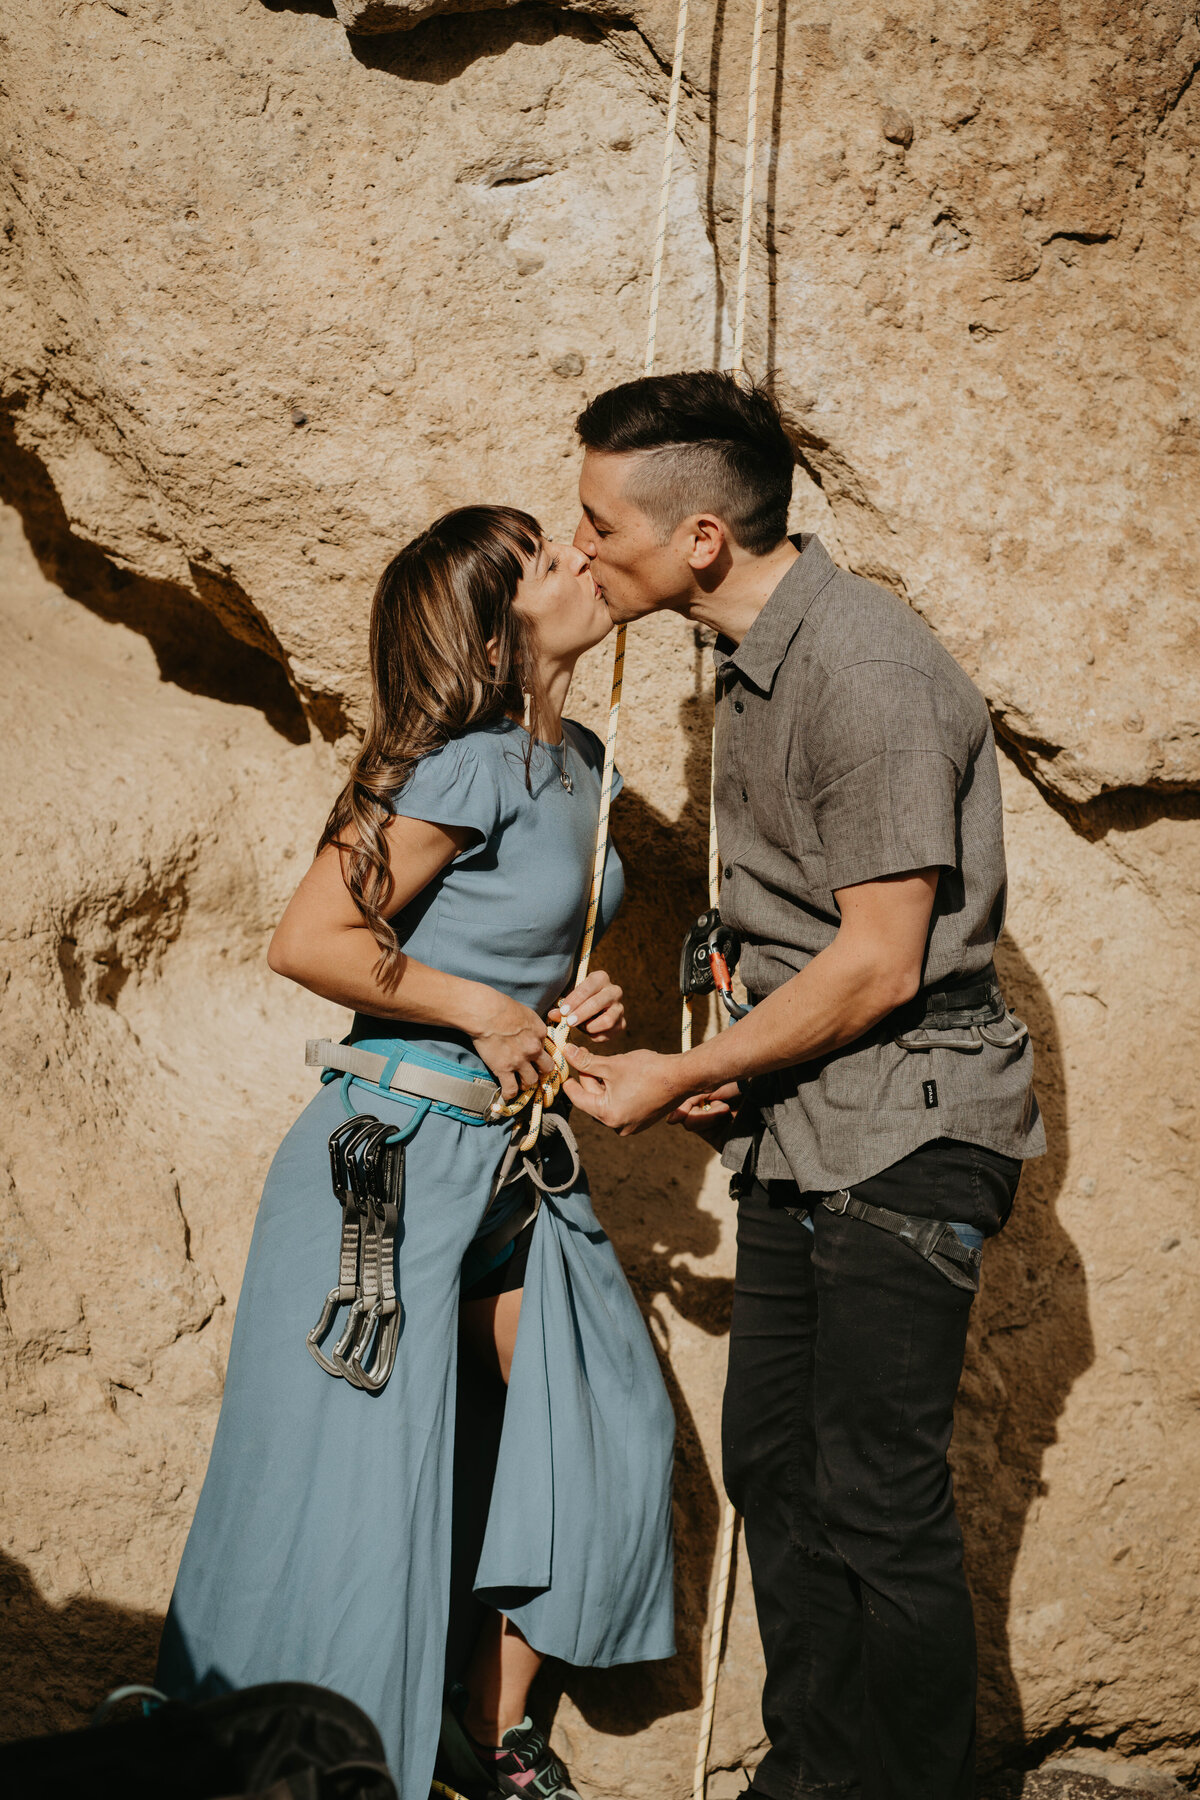 Couple kissing while getting rock climbing gear ready for rock climbing engagement photos